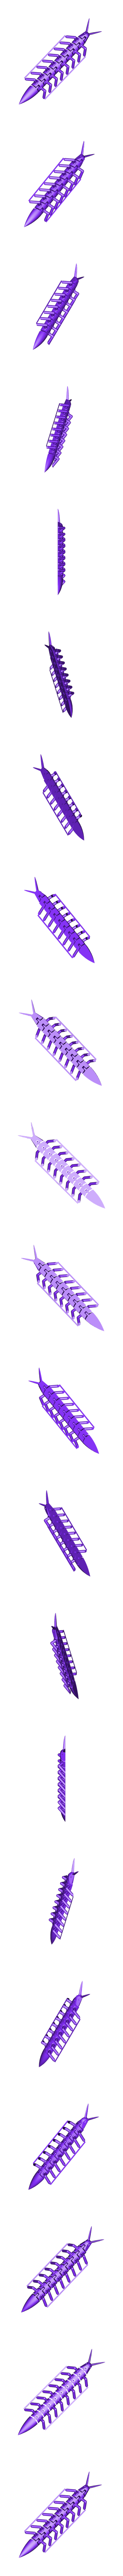 Anchored-Articulated_Centipede_fixed.stl Download free STL file Articulated Bugs • 3D printer model, 8ran